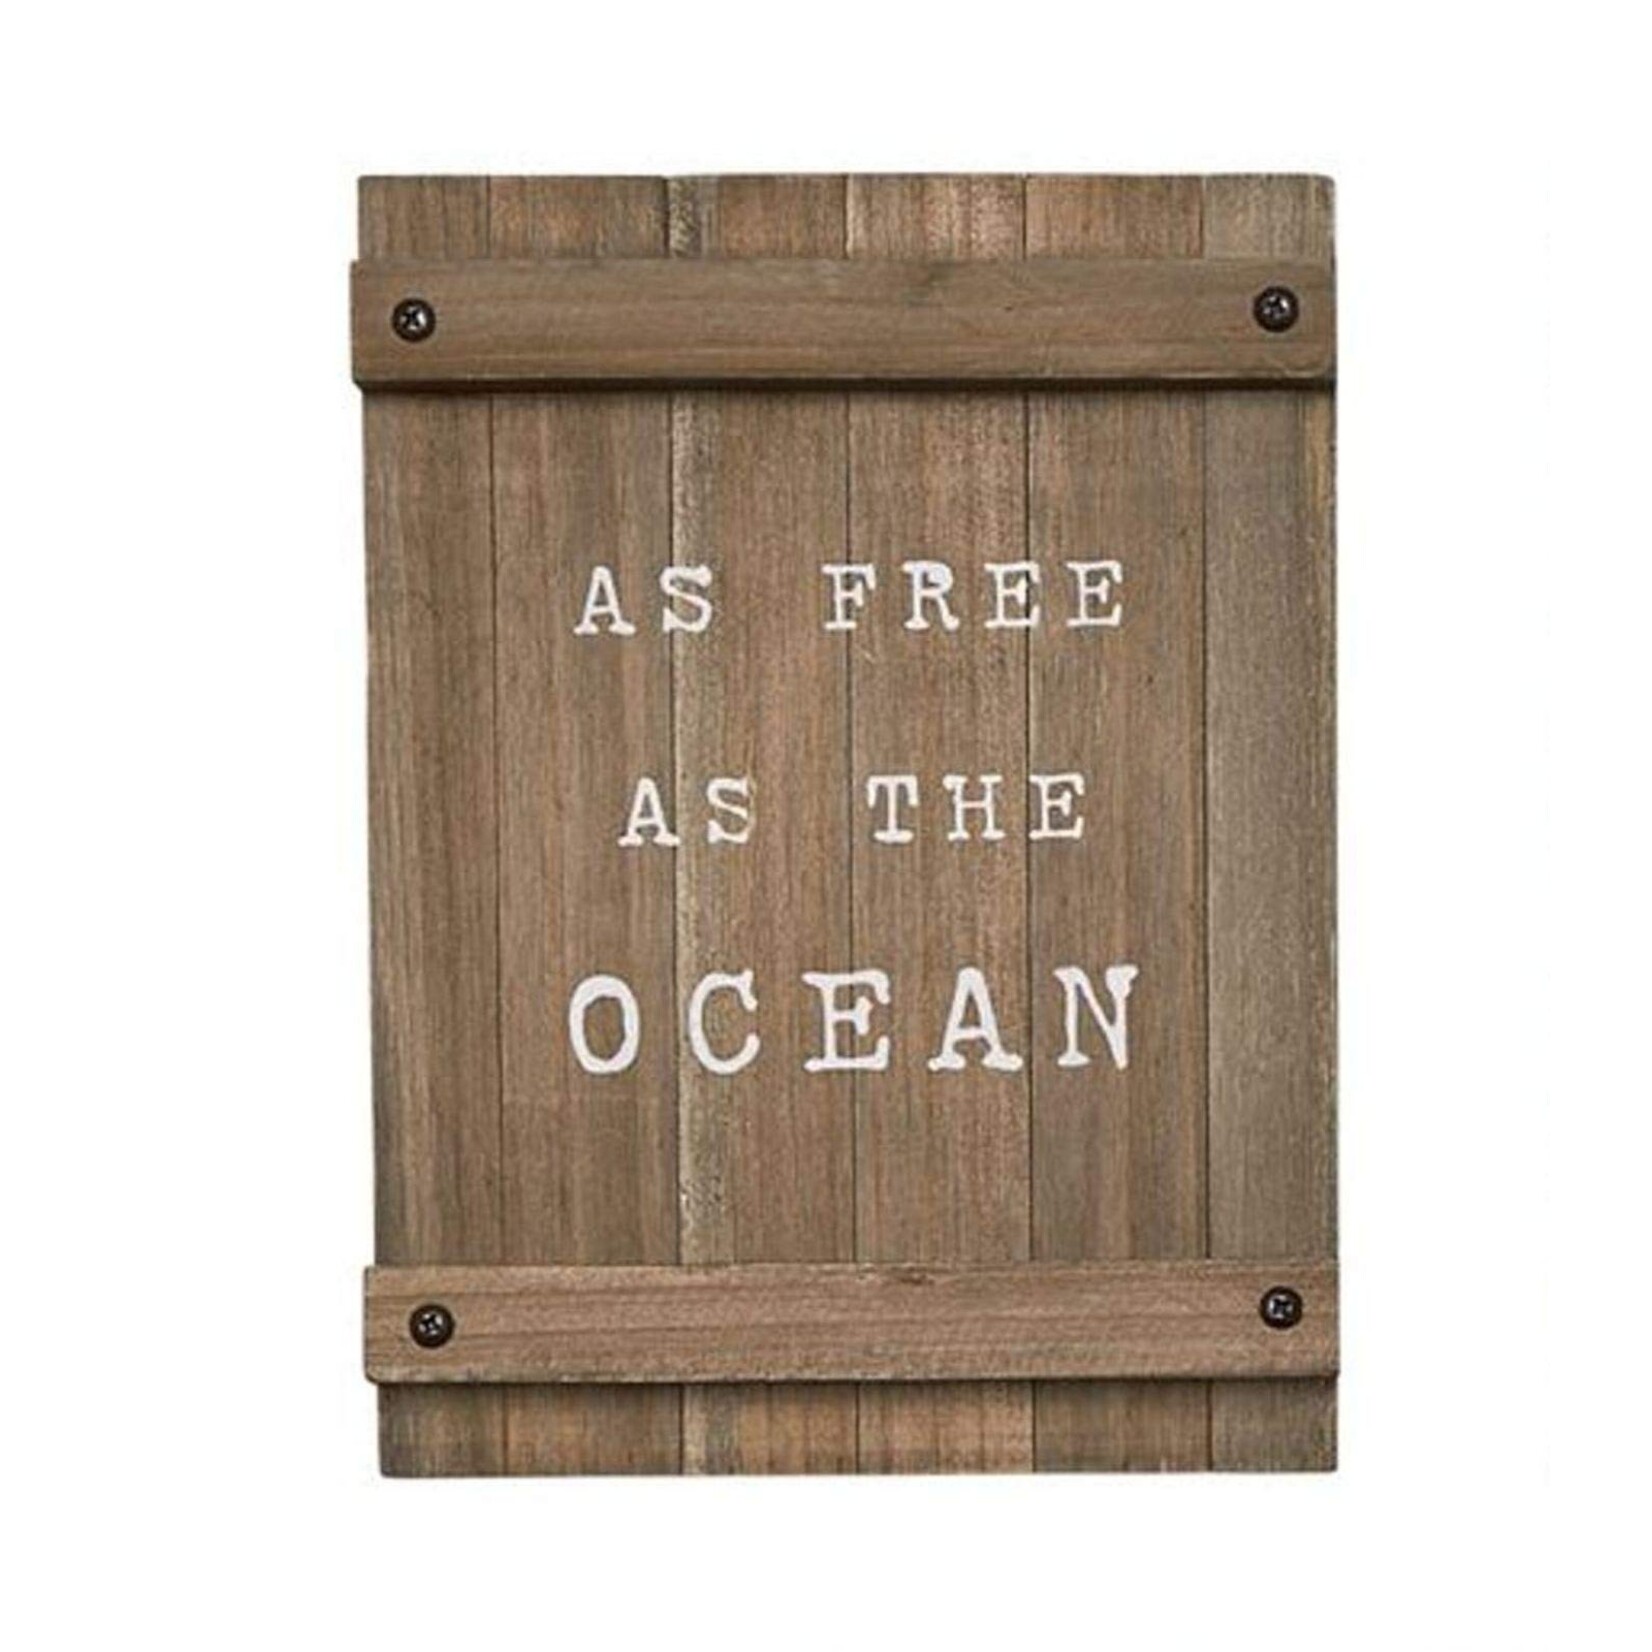 Mudpie As Free As the Ocean Wall Plaque